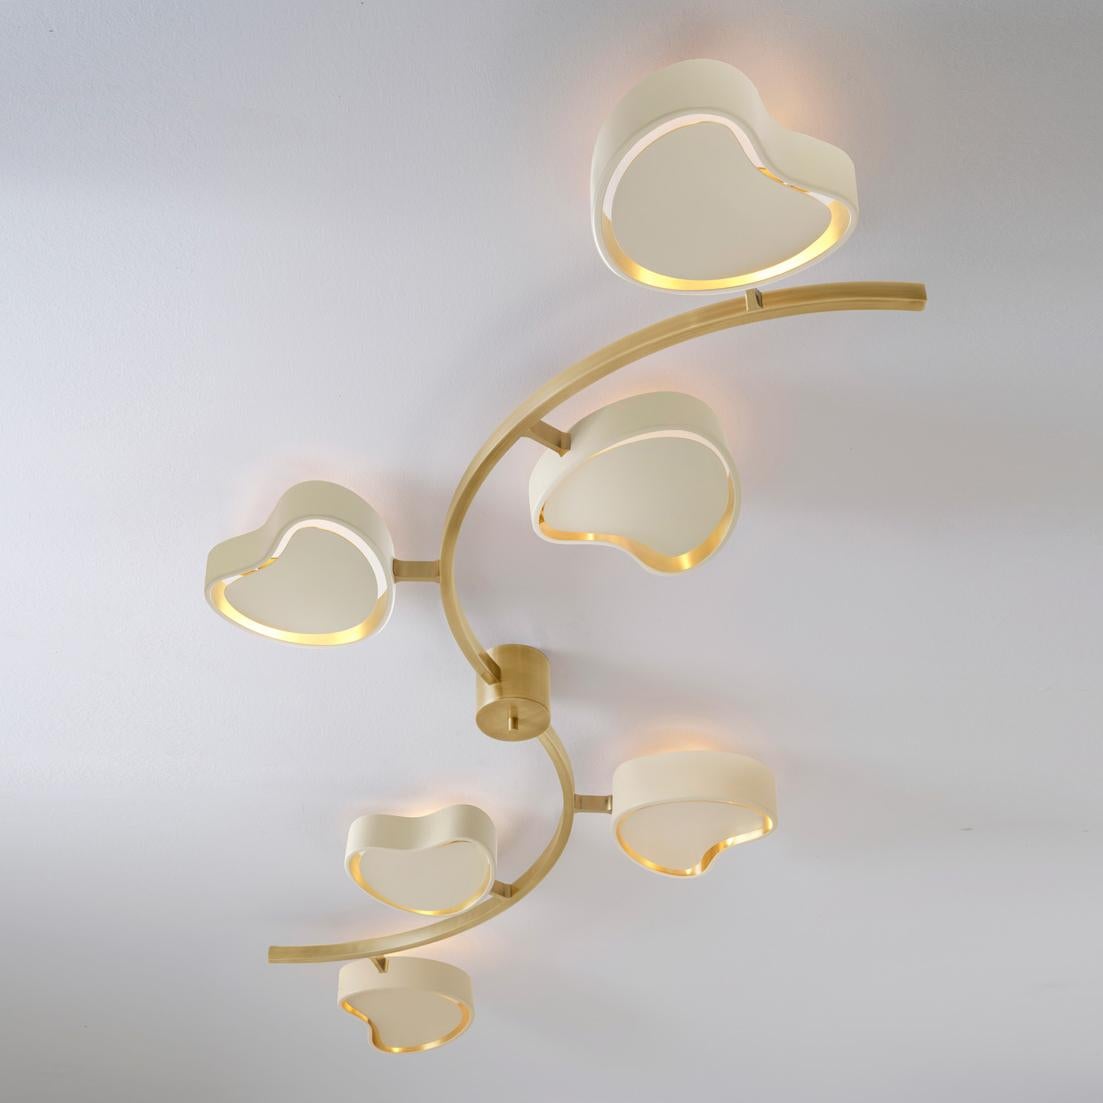 Cuore N.6 Ceiling Light by Gaspare Asaro. Bronze and Satin Brass Finish For Sale 2